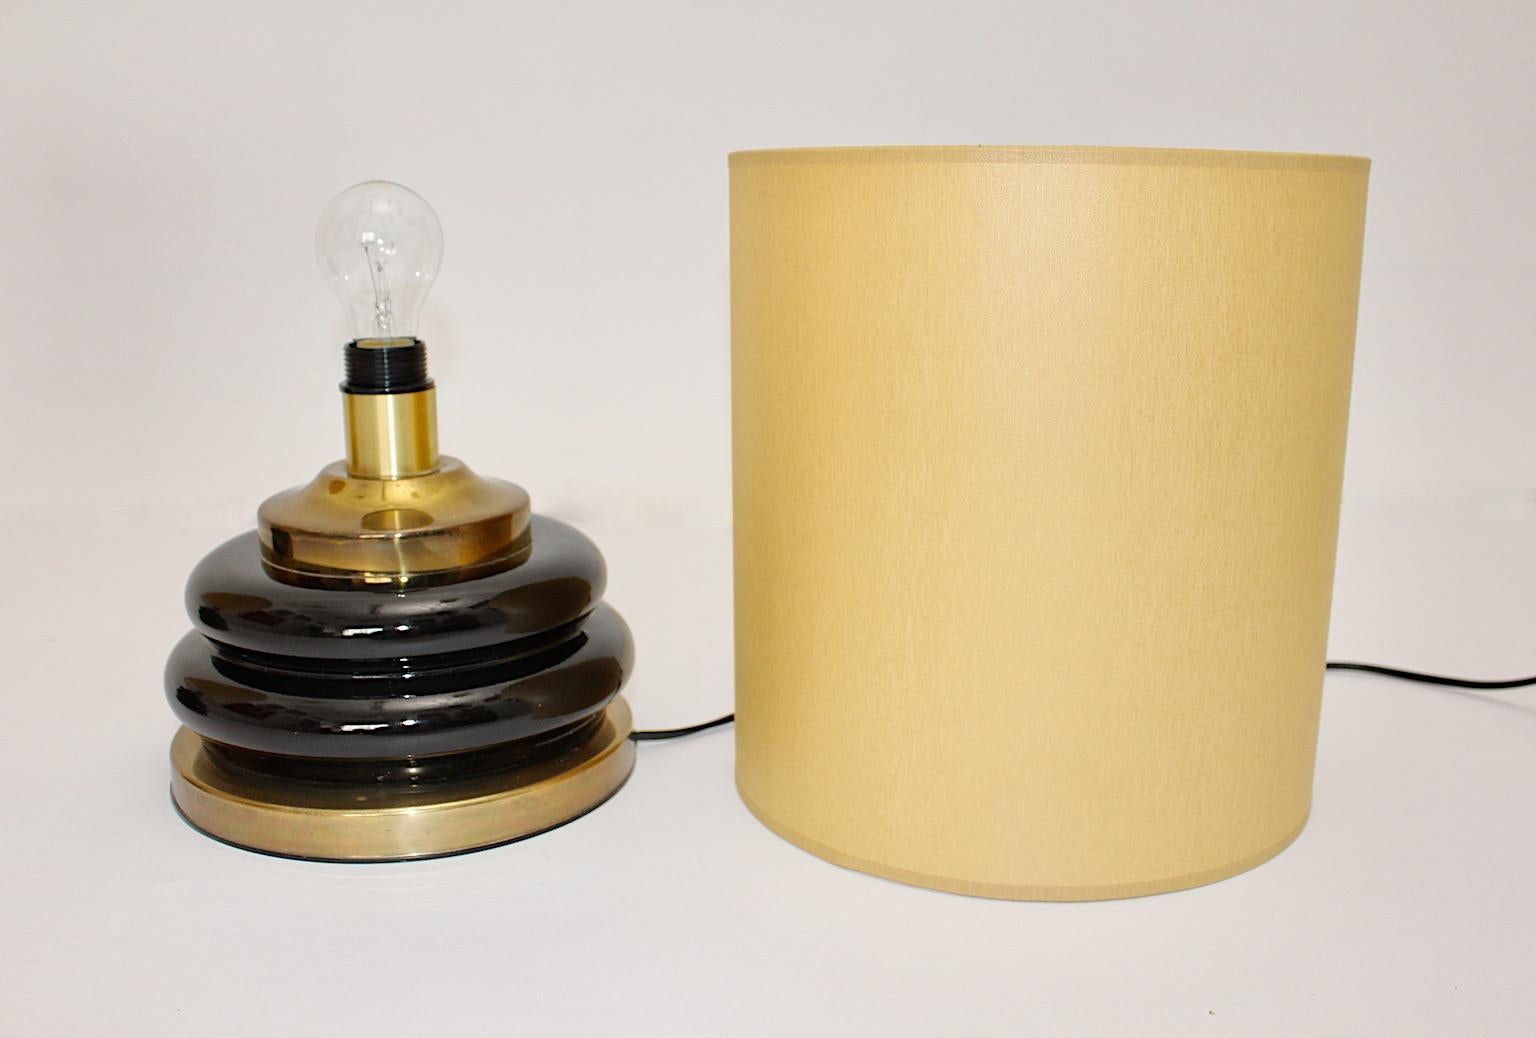 Modernist Brown Gold Glass Vintage Table Lamps Pair Duo, 1970s, Italy For Sale 7